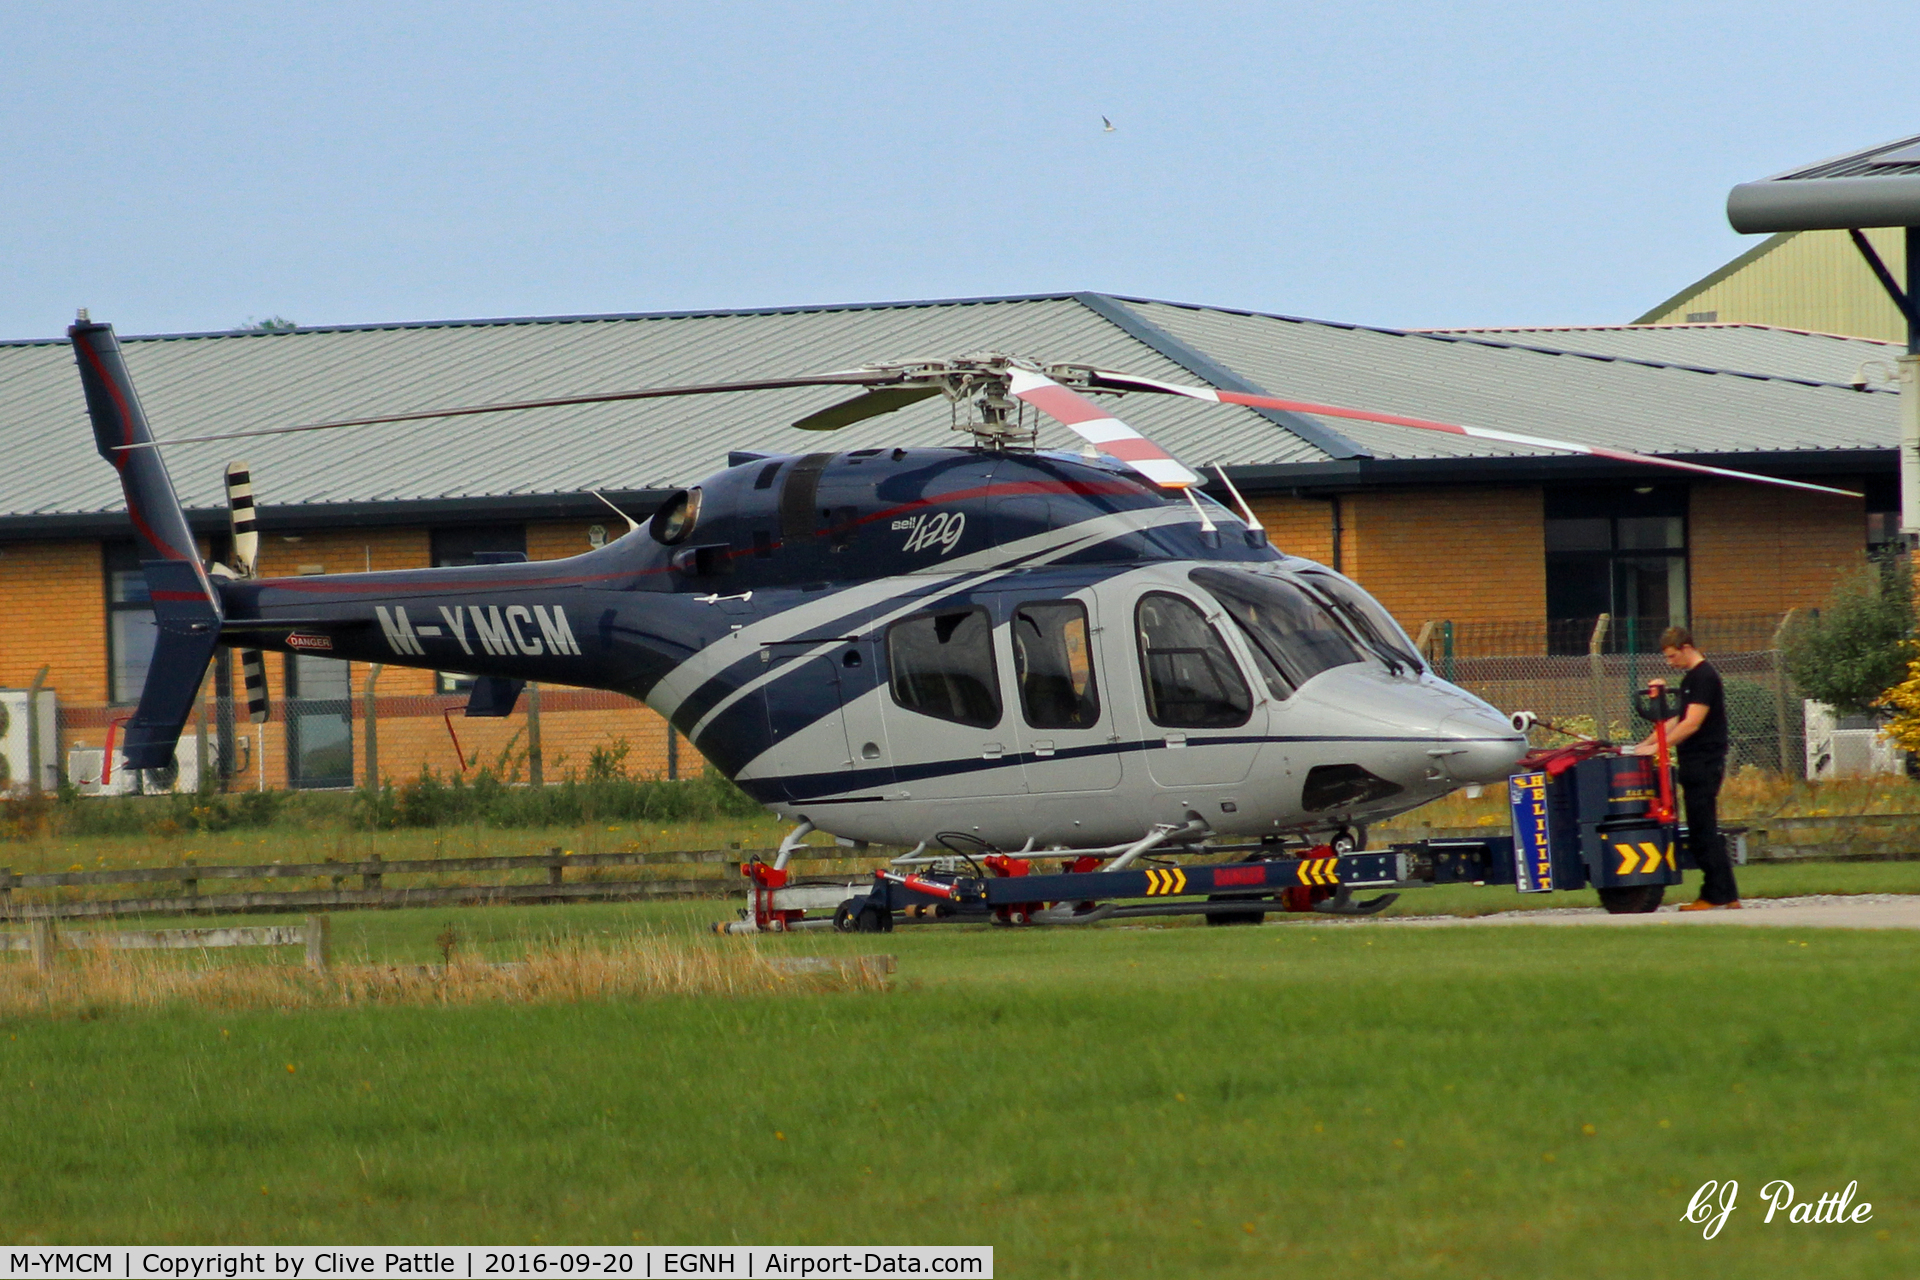 M-YMCM, 2012 Bell 429 GlobalRanger C/N 57107, At the J-Max aviation facility at Blackpool EGNH